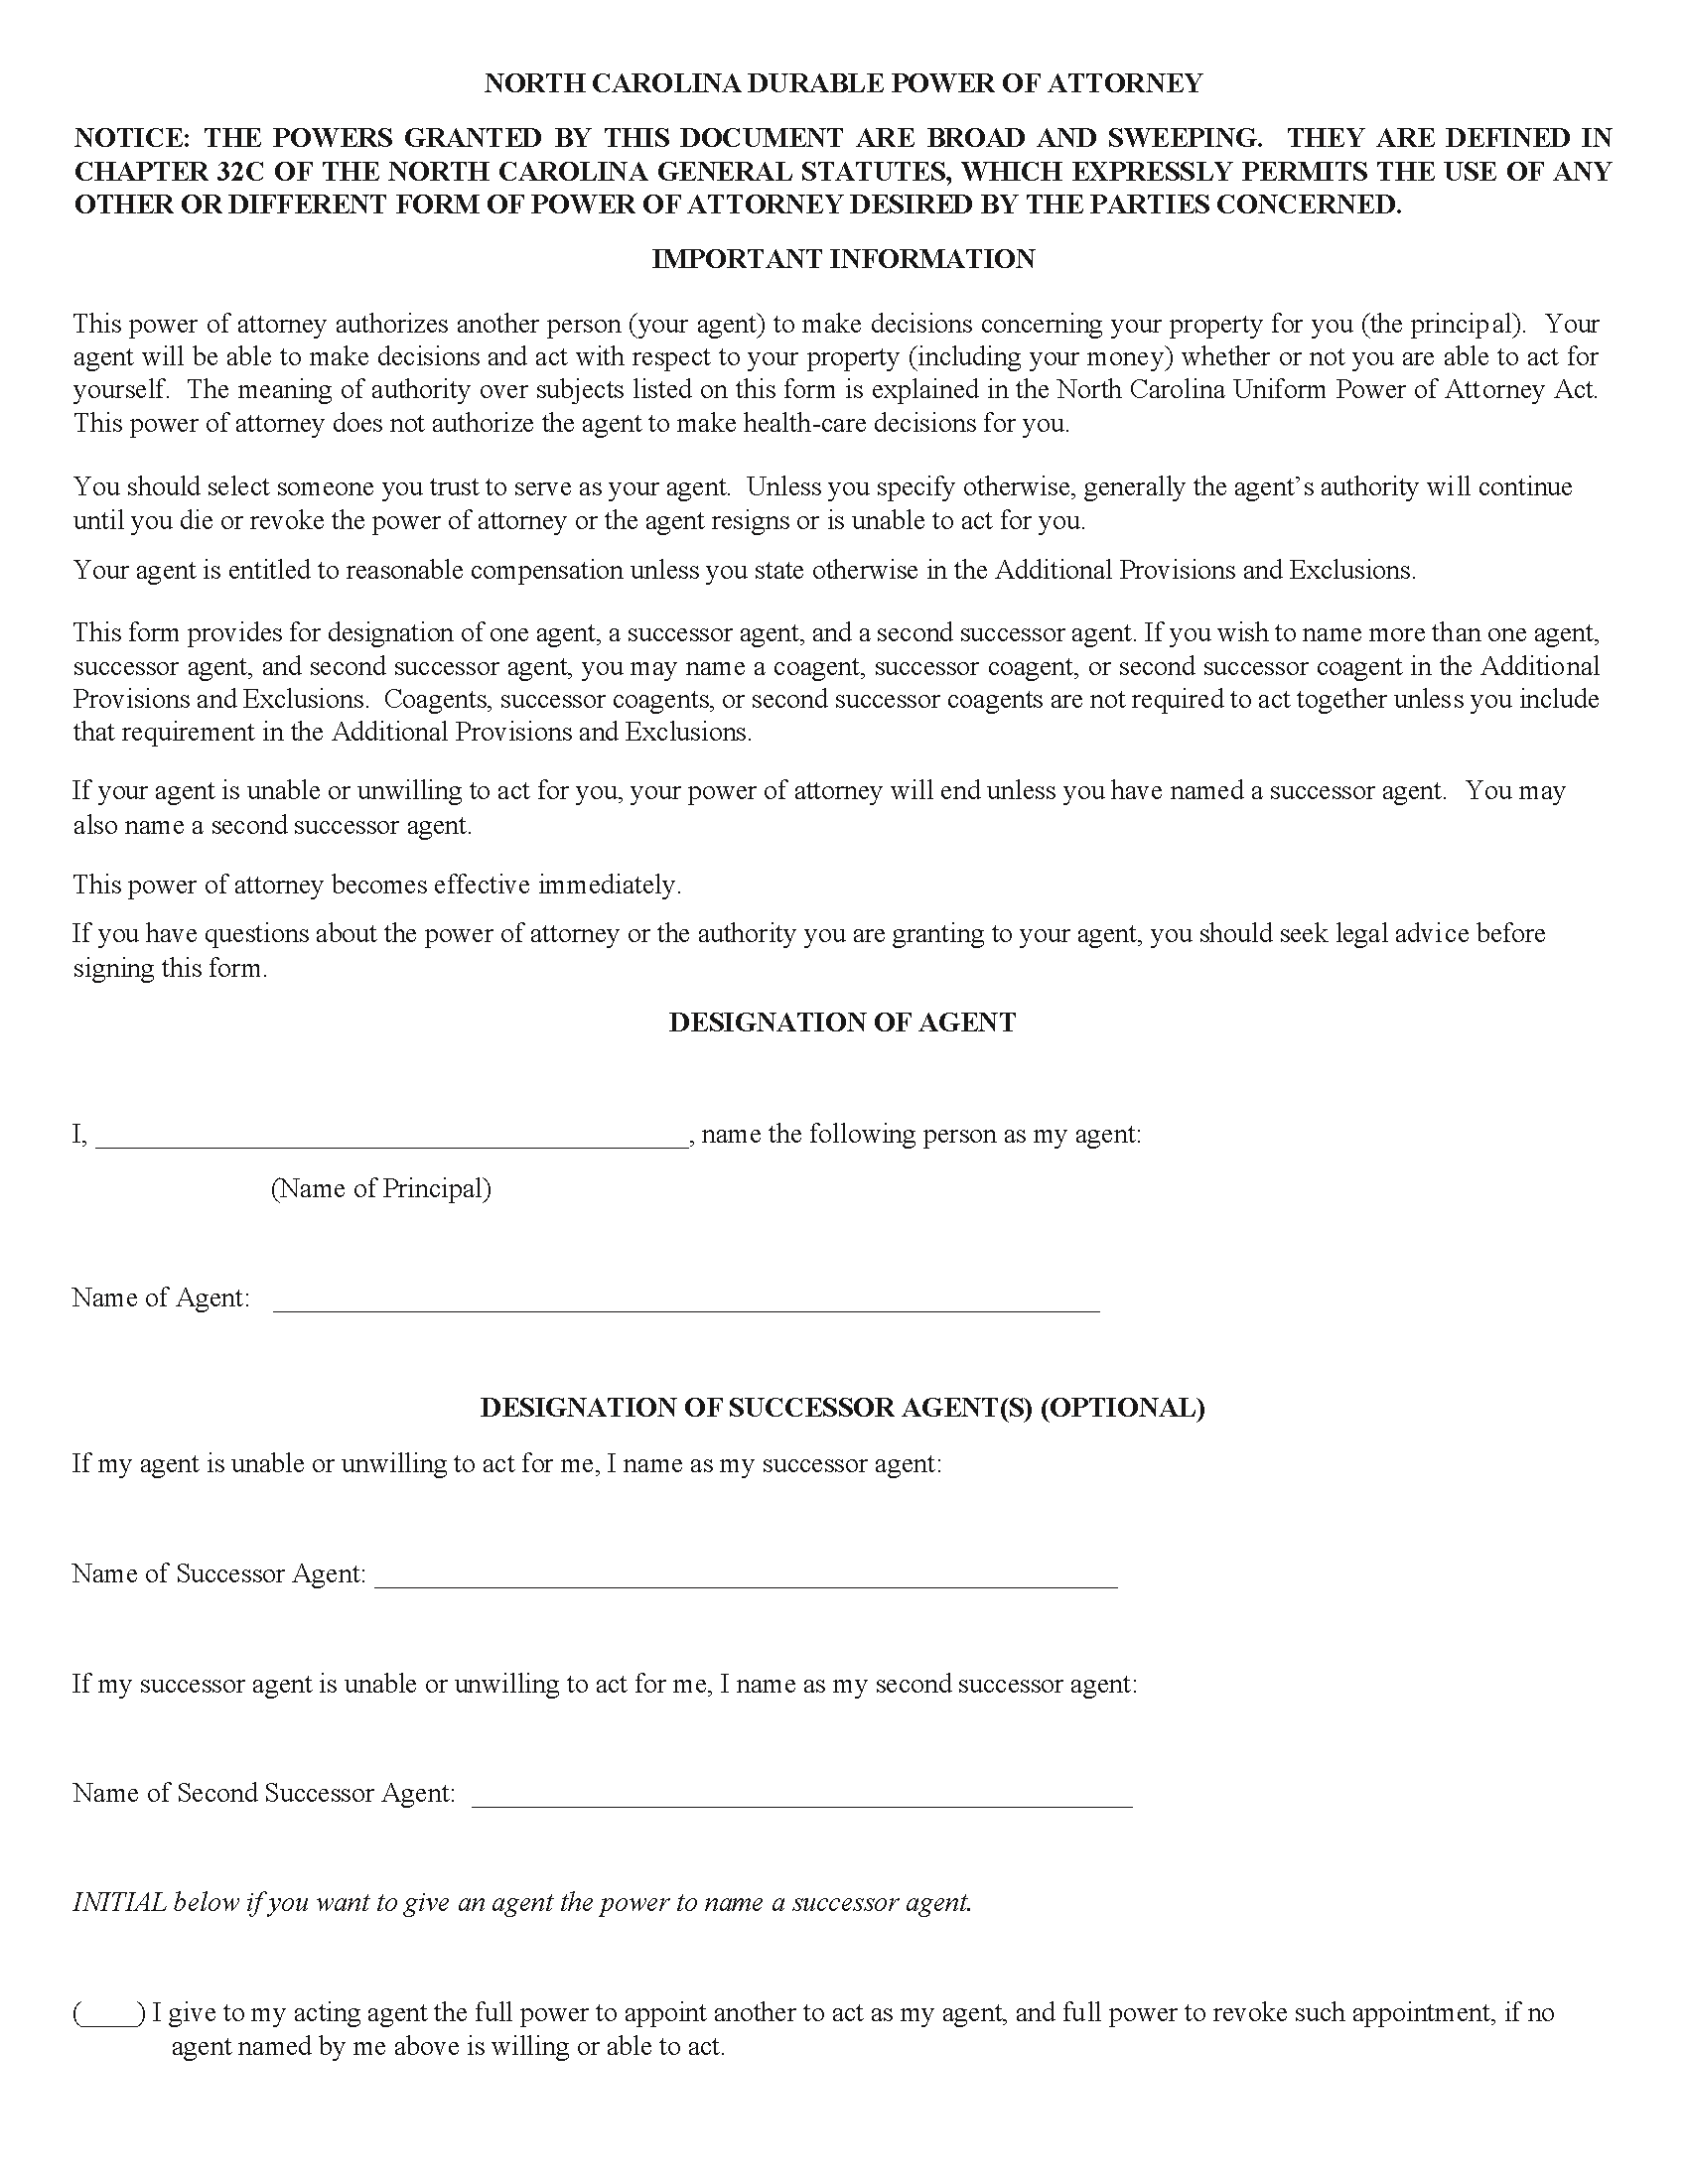 North Carolina Durable Power of Attorney Form - Free Printable Legal Forms